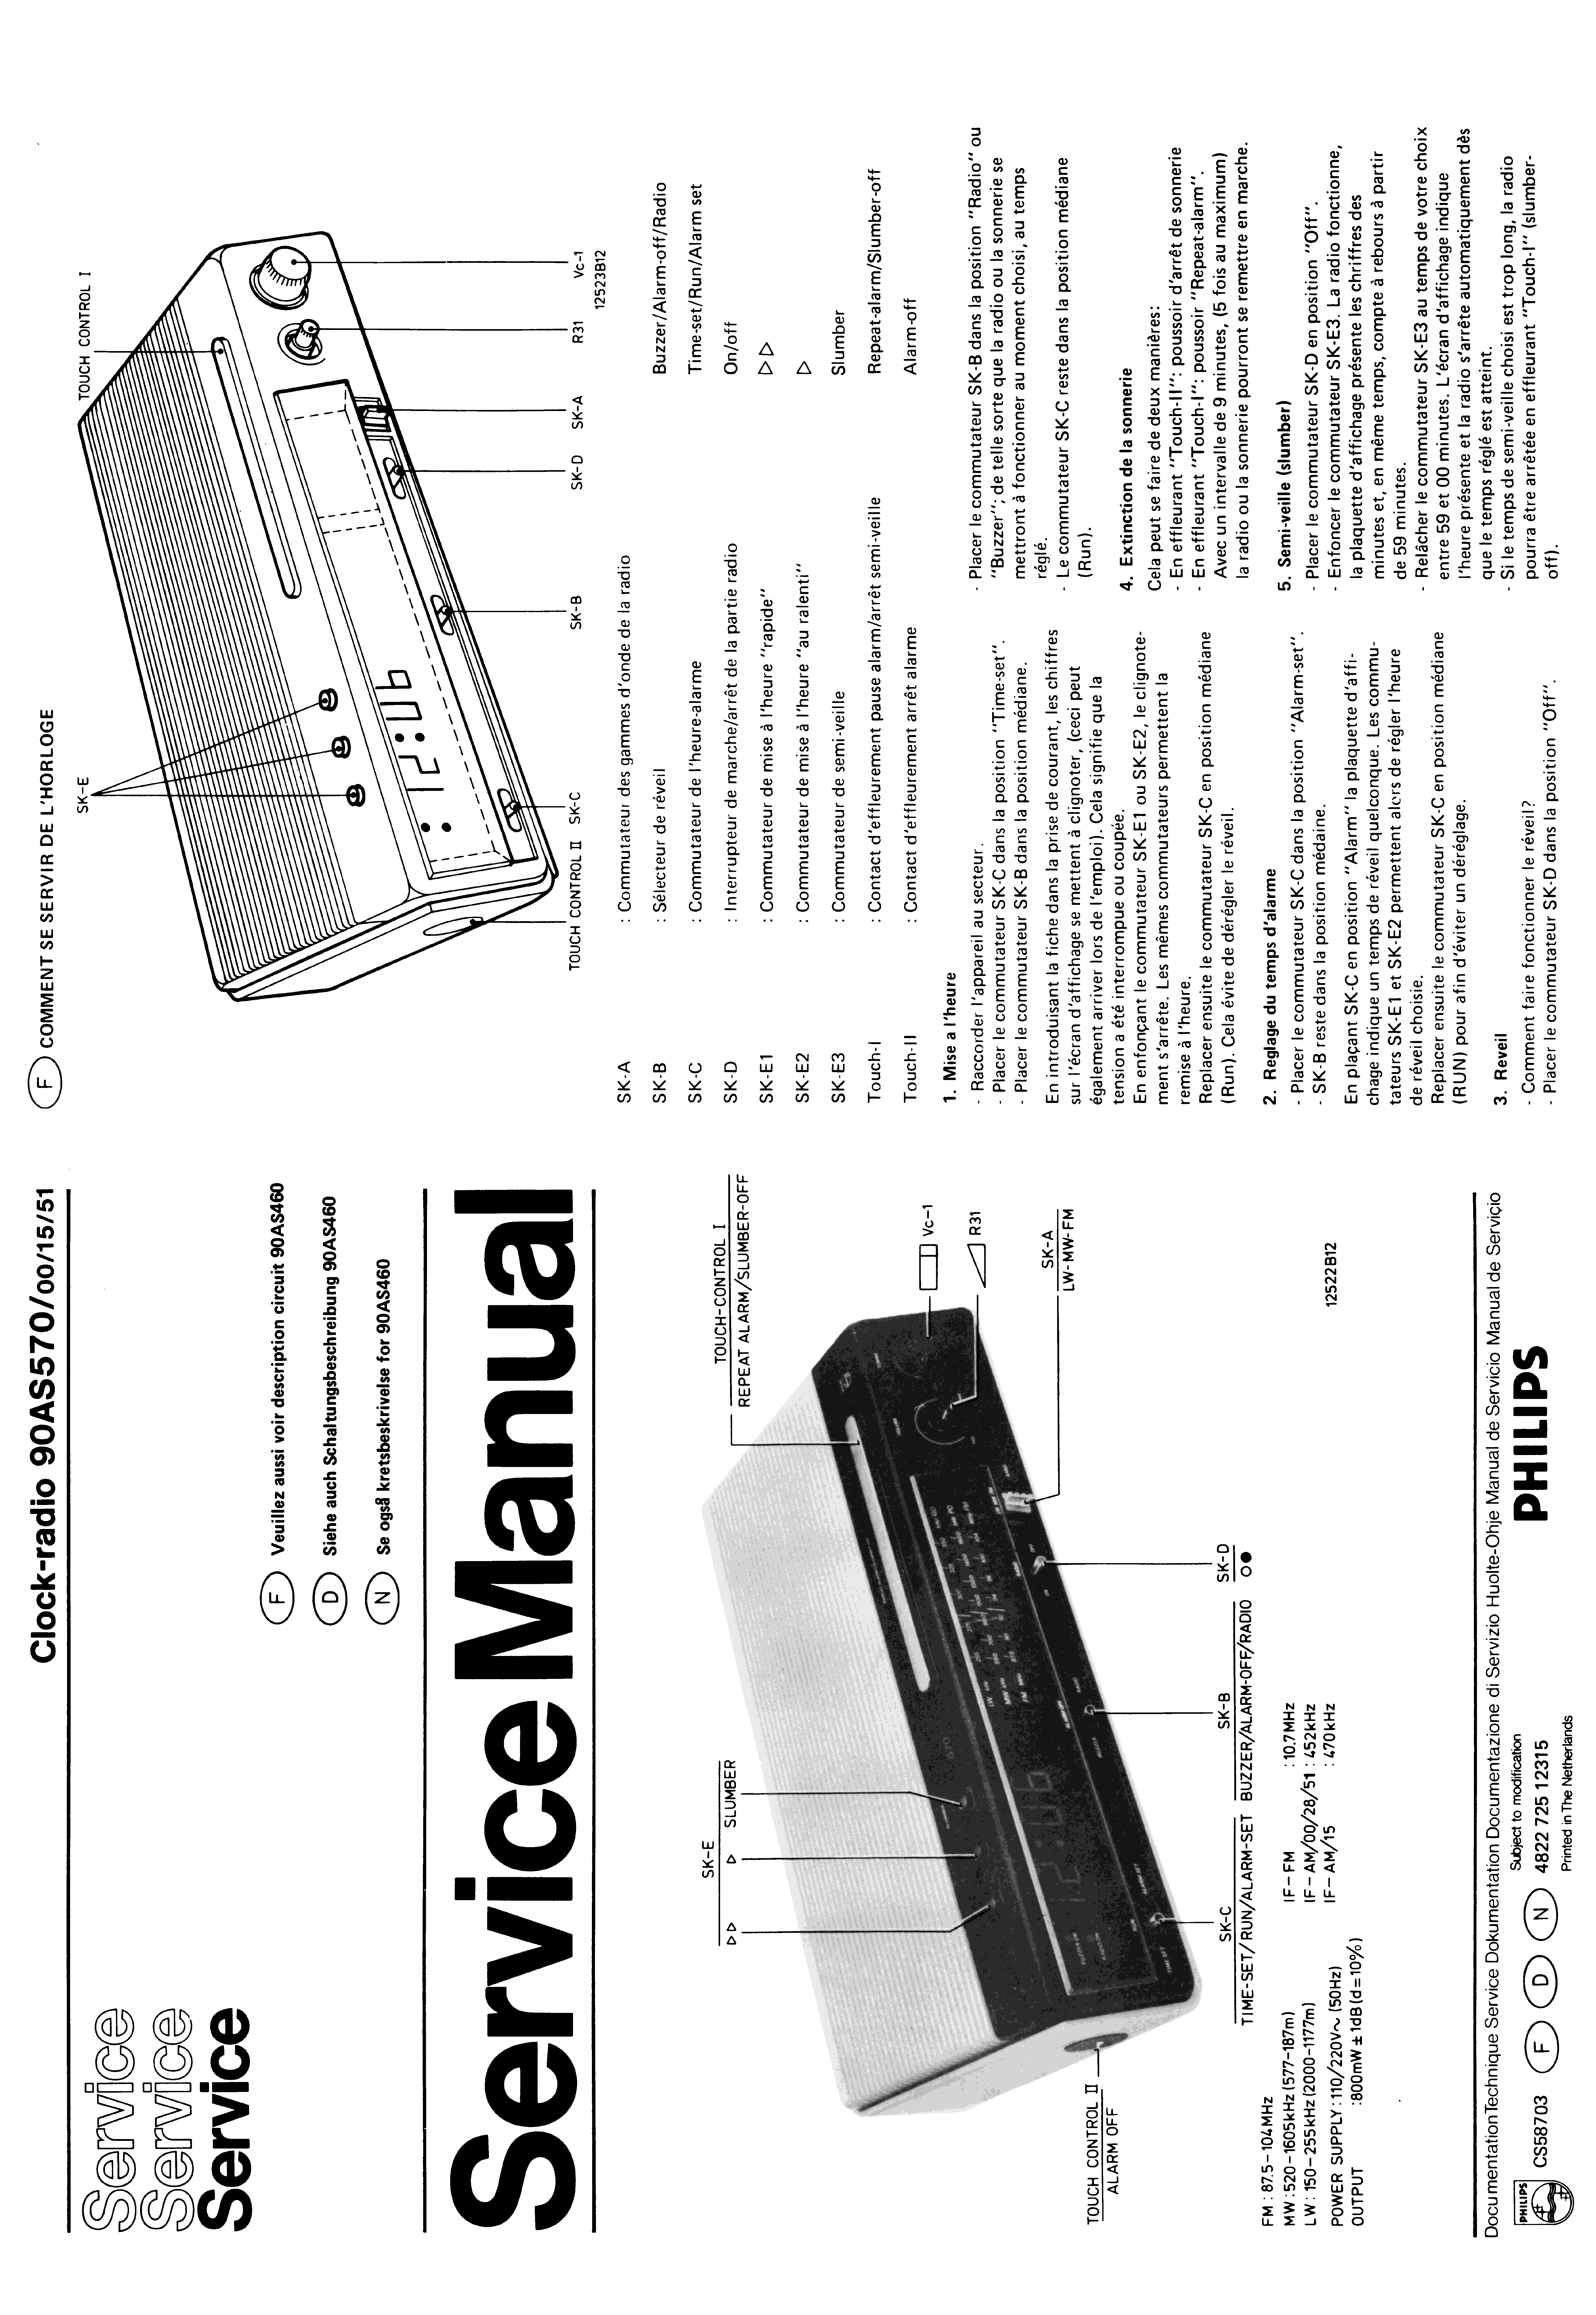 PHILIPS CLOCK-RADIO 90AS570 SM service manual (1st page)